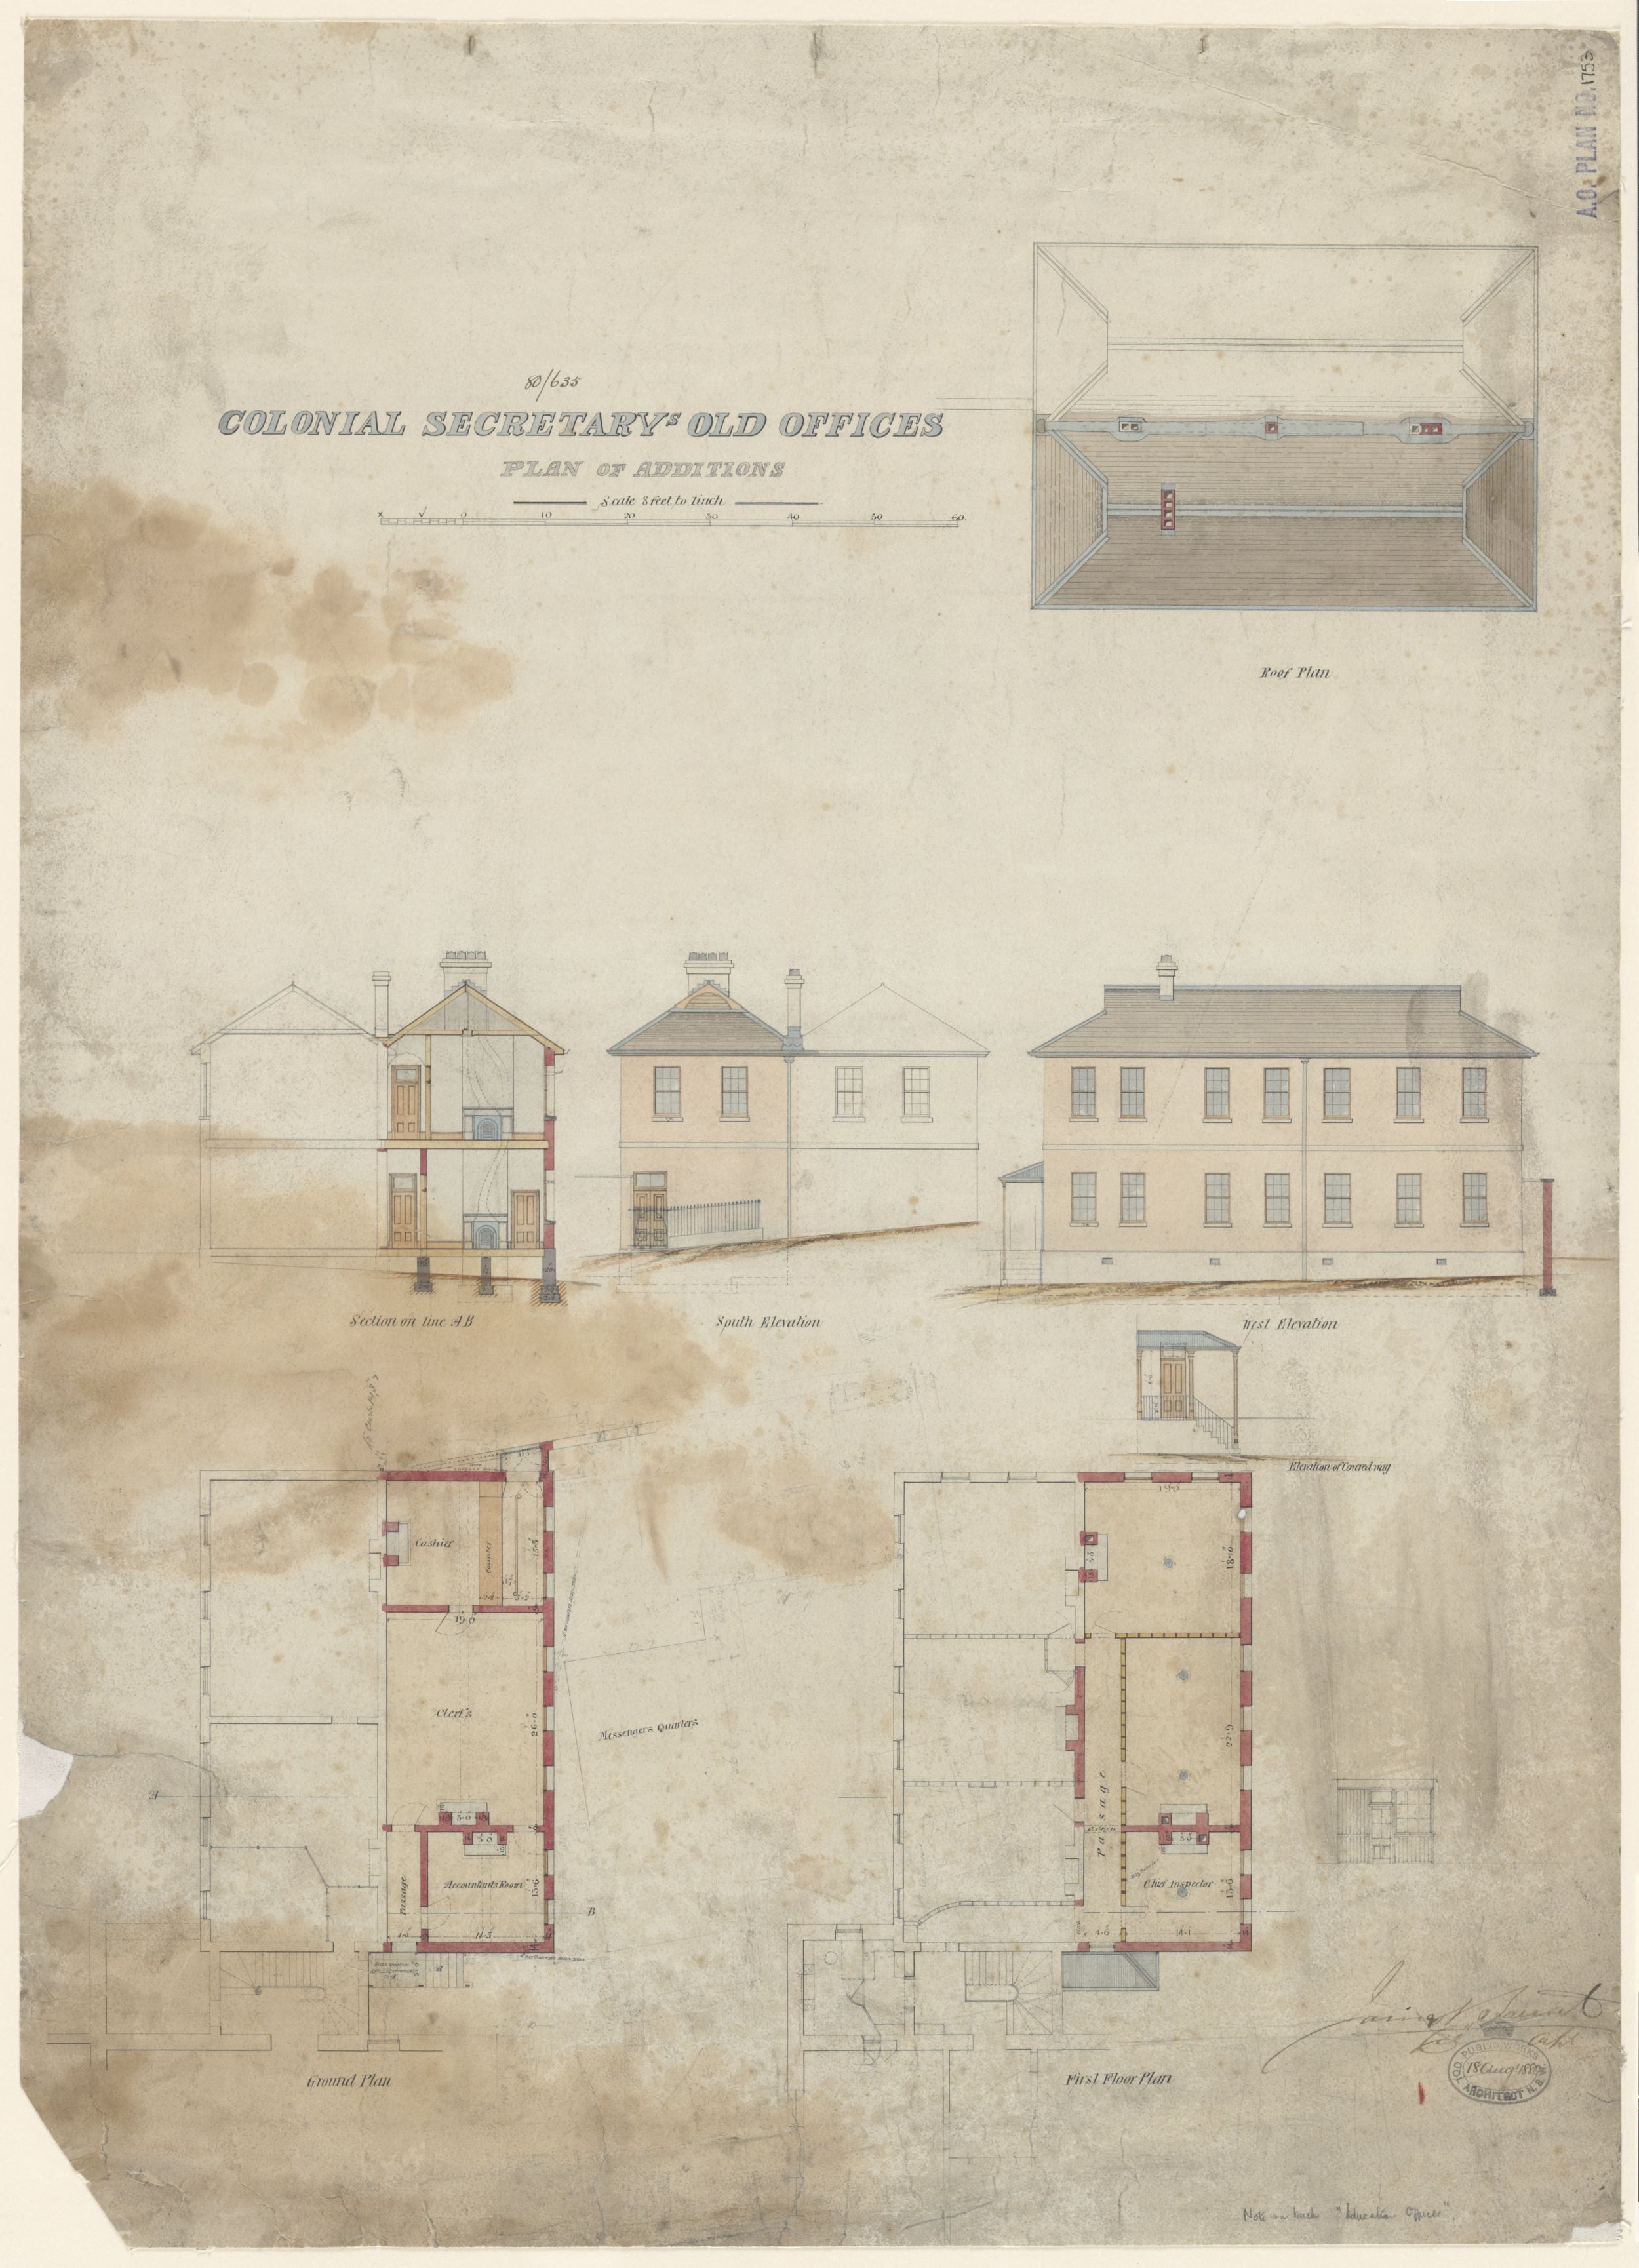 Plan of the Colonial Secretary's building